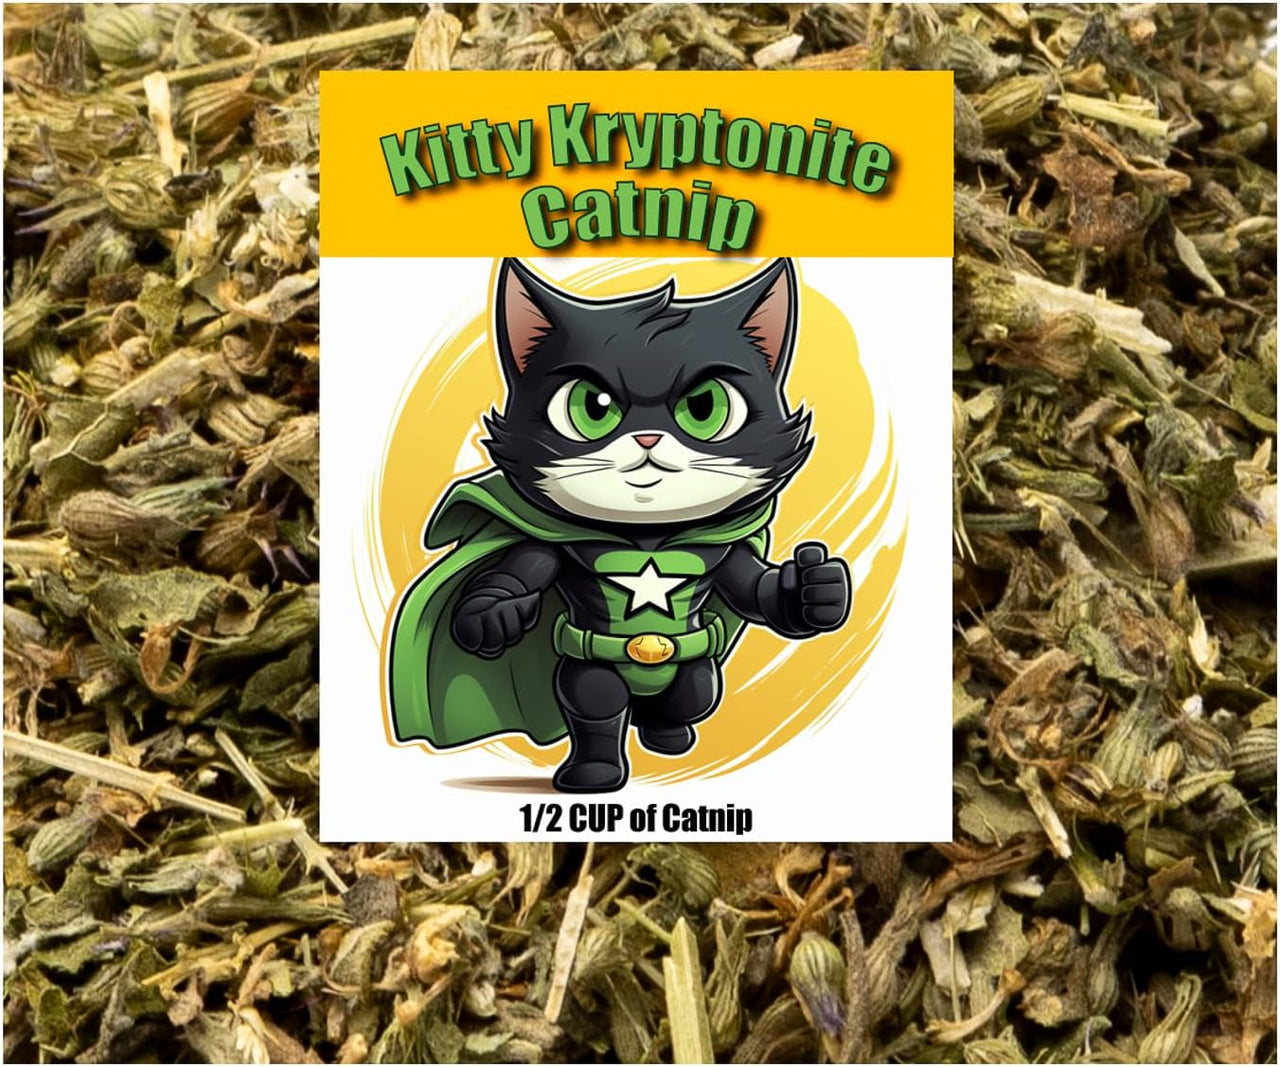 DesertUSA Kitty Kryptonite Catnip Blend - North American Crafted, 100% Natural, and Non-Addictive Catnip Treats for Enhanced Playfulness. Perfect for Cat Accessories (1/2 Cup)